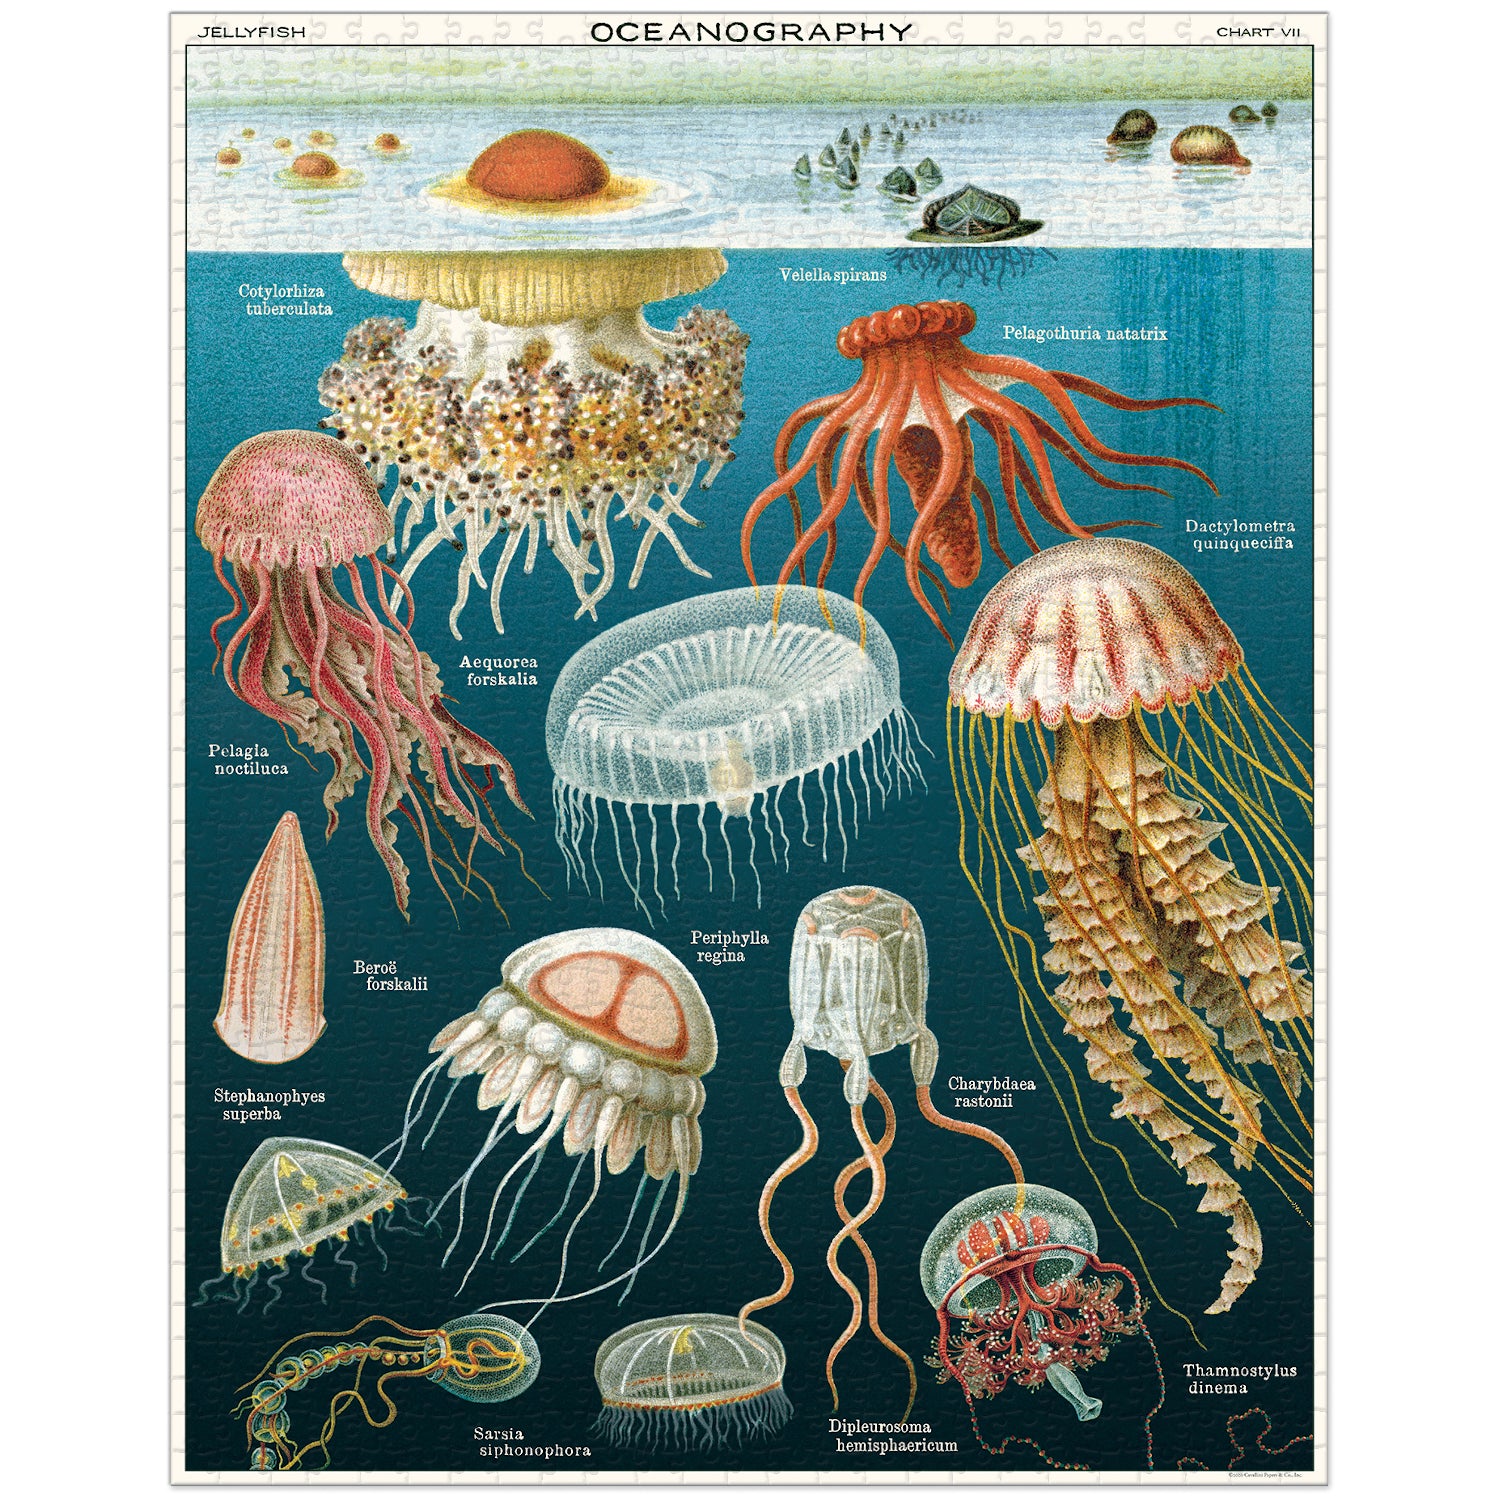 A 1000-piece Cavallini Papers &amp; Co Jellyfish Puzzle featuring vintage illustrations of various jellyfish species from the Cavallini archives, packaged in a cylindrical box.